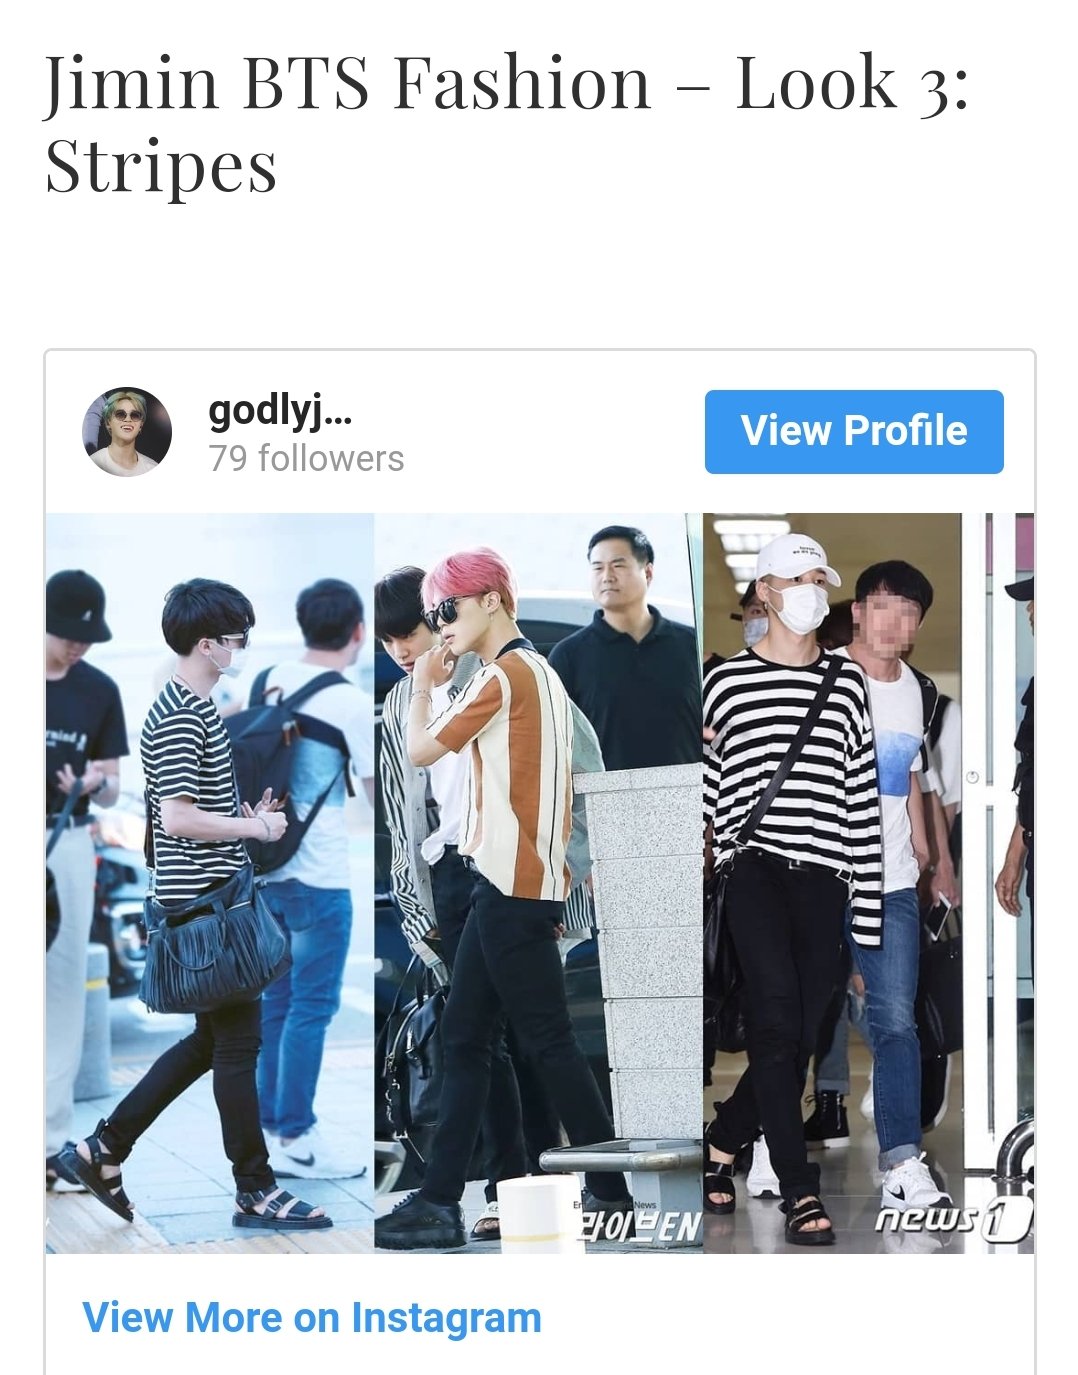 Jimin BTS Fashion: 3 Looks Inspired by Jimin's Style - College Fashion